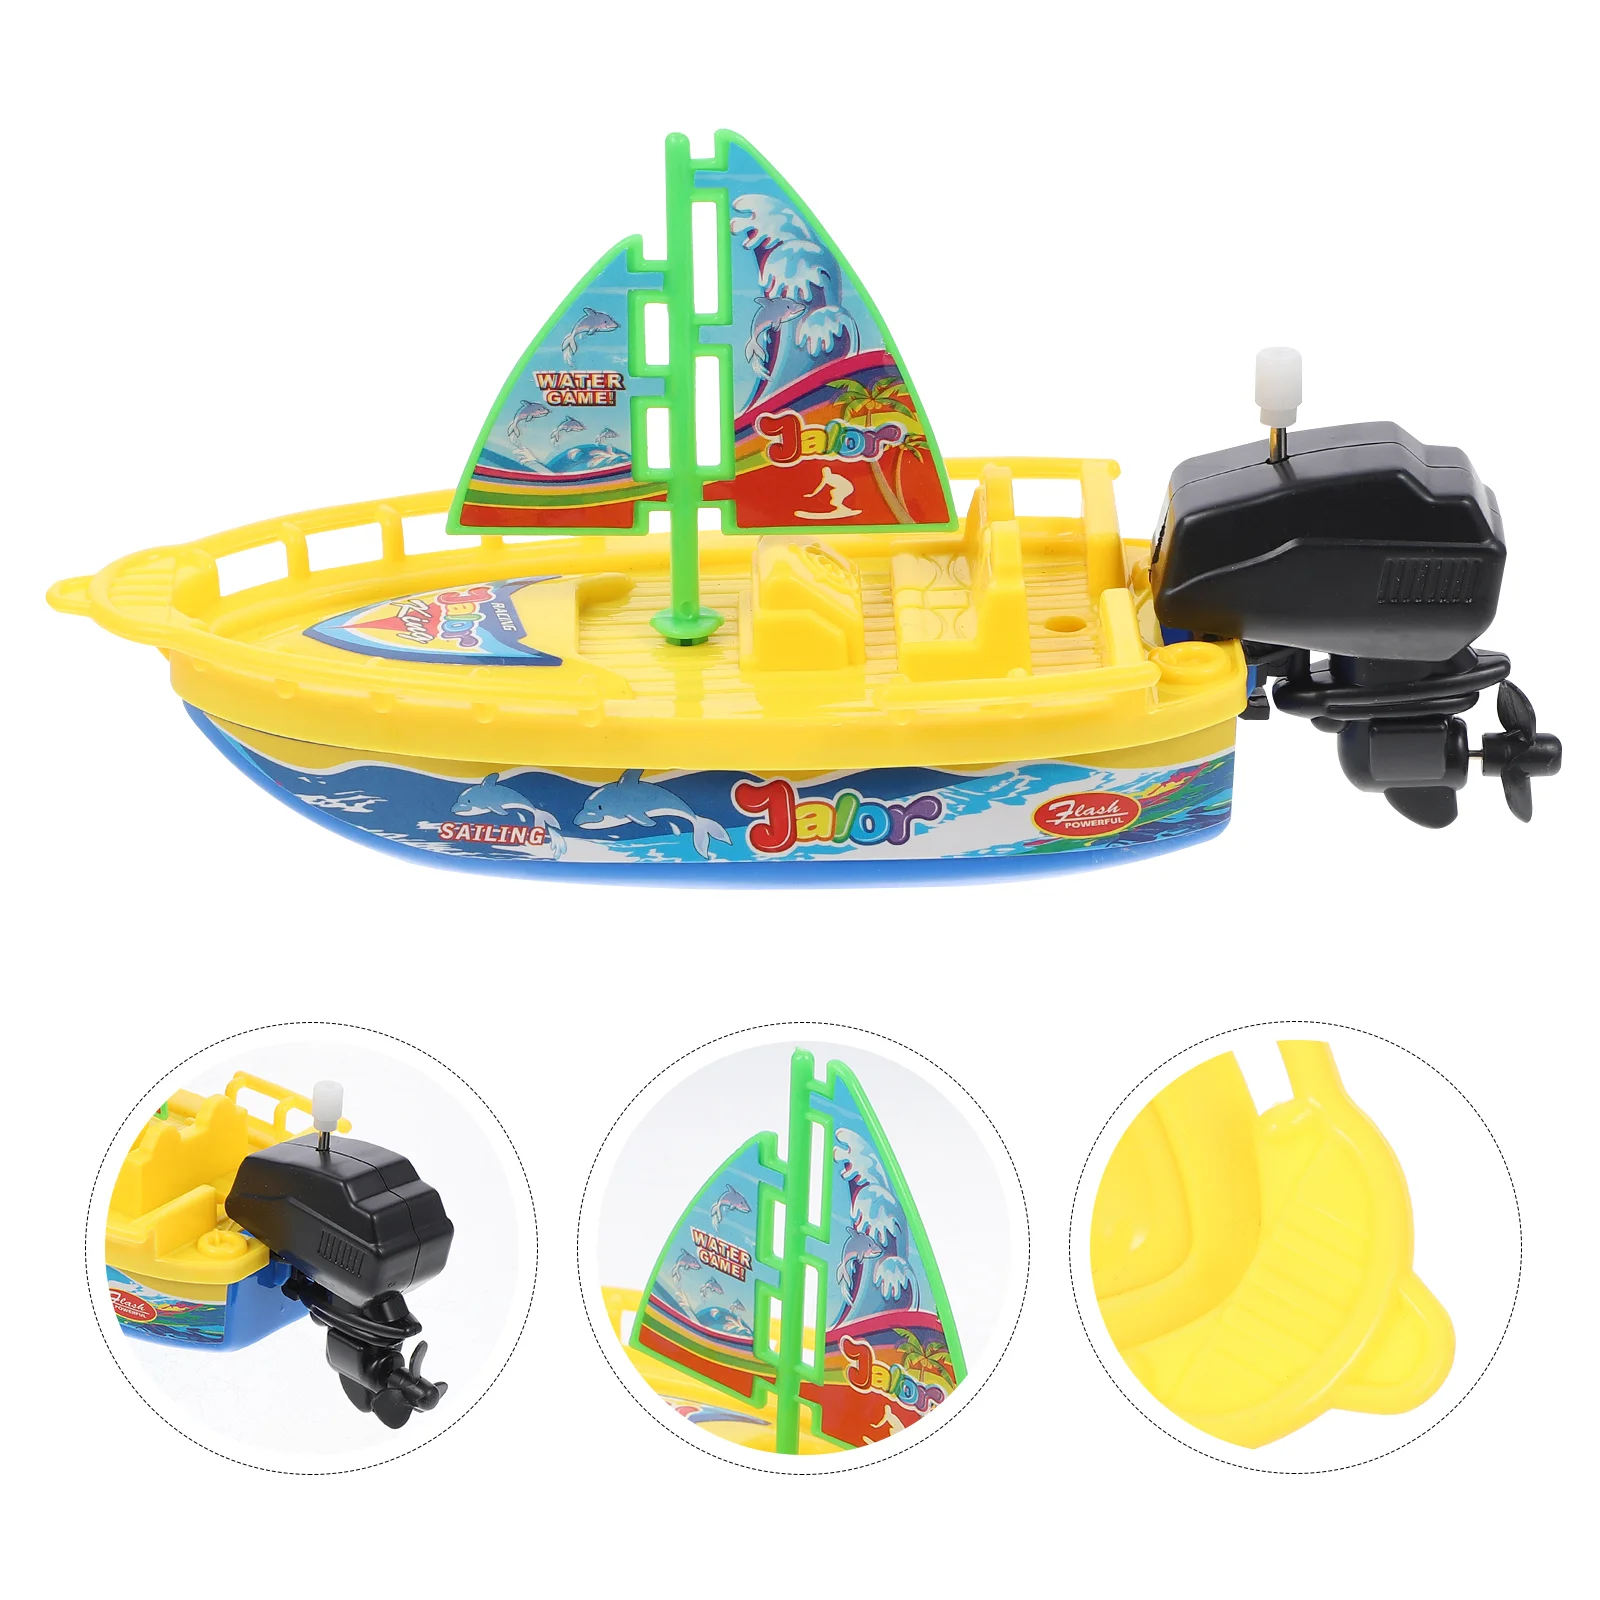 

2Pcs Bath Toy Little Boat Wind-up Toy Water Sprayer Toy Plastic Tugboats for Bathtub (Random Color) Inflatable toys Baby